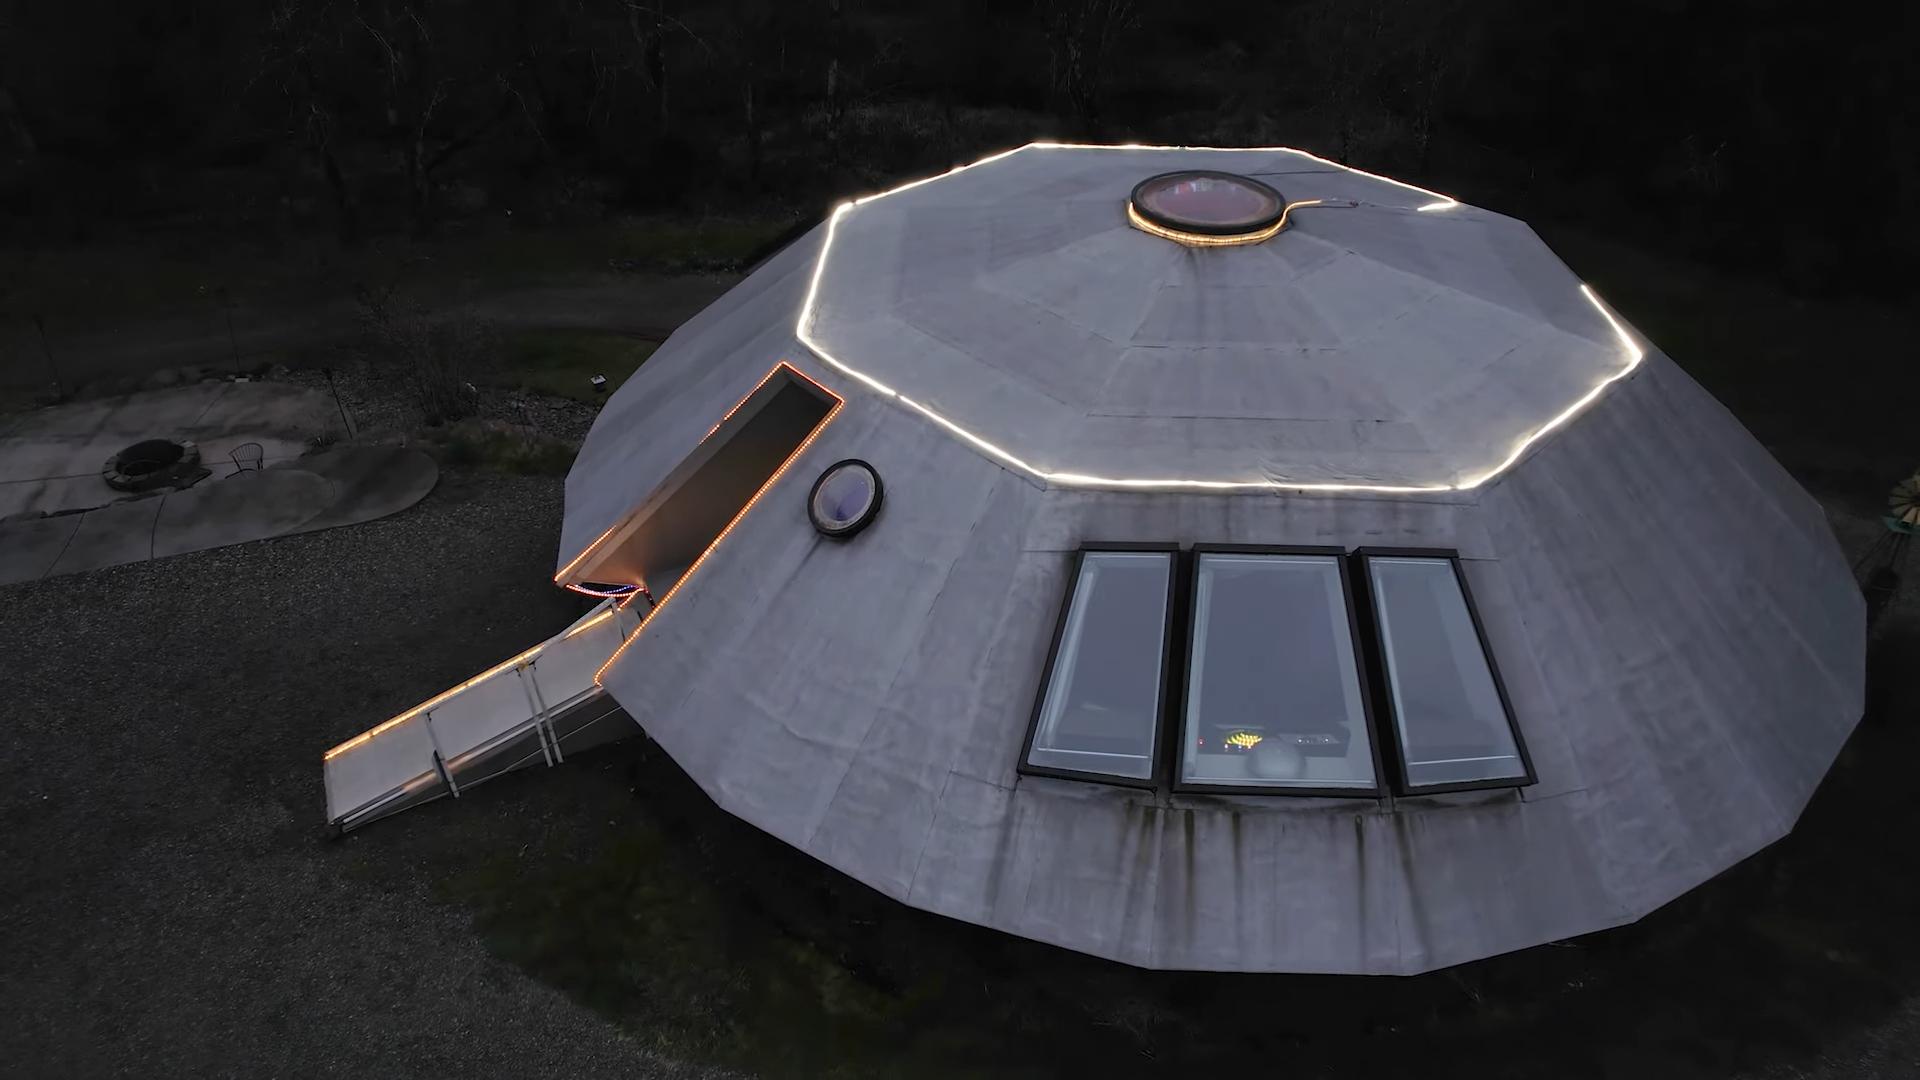 He Built a Spaceship Home Above a Two Car Garage [Video]